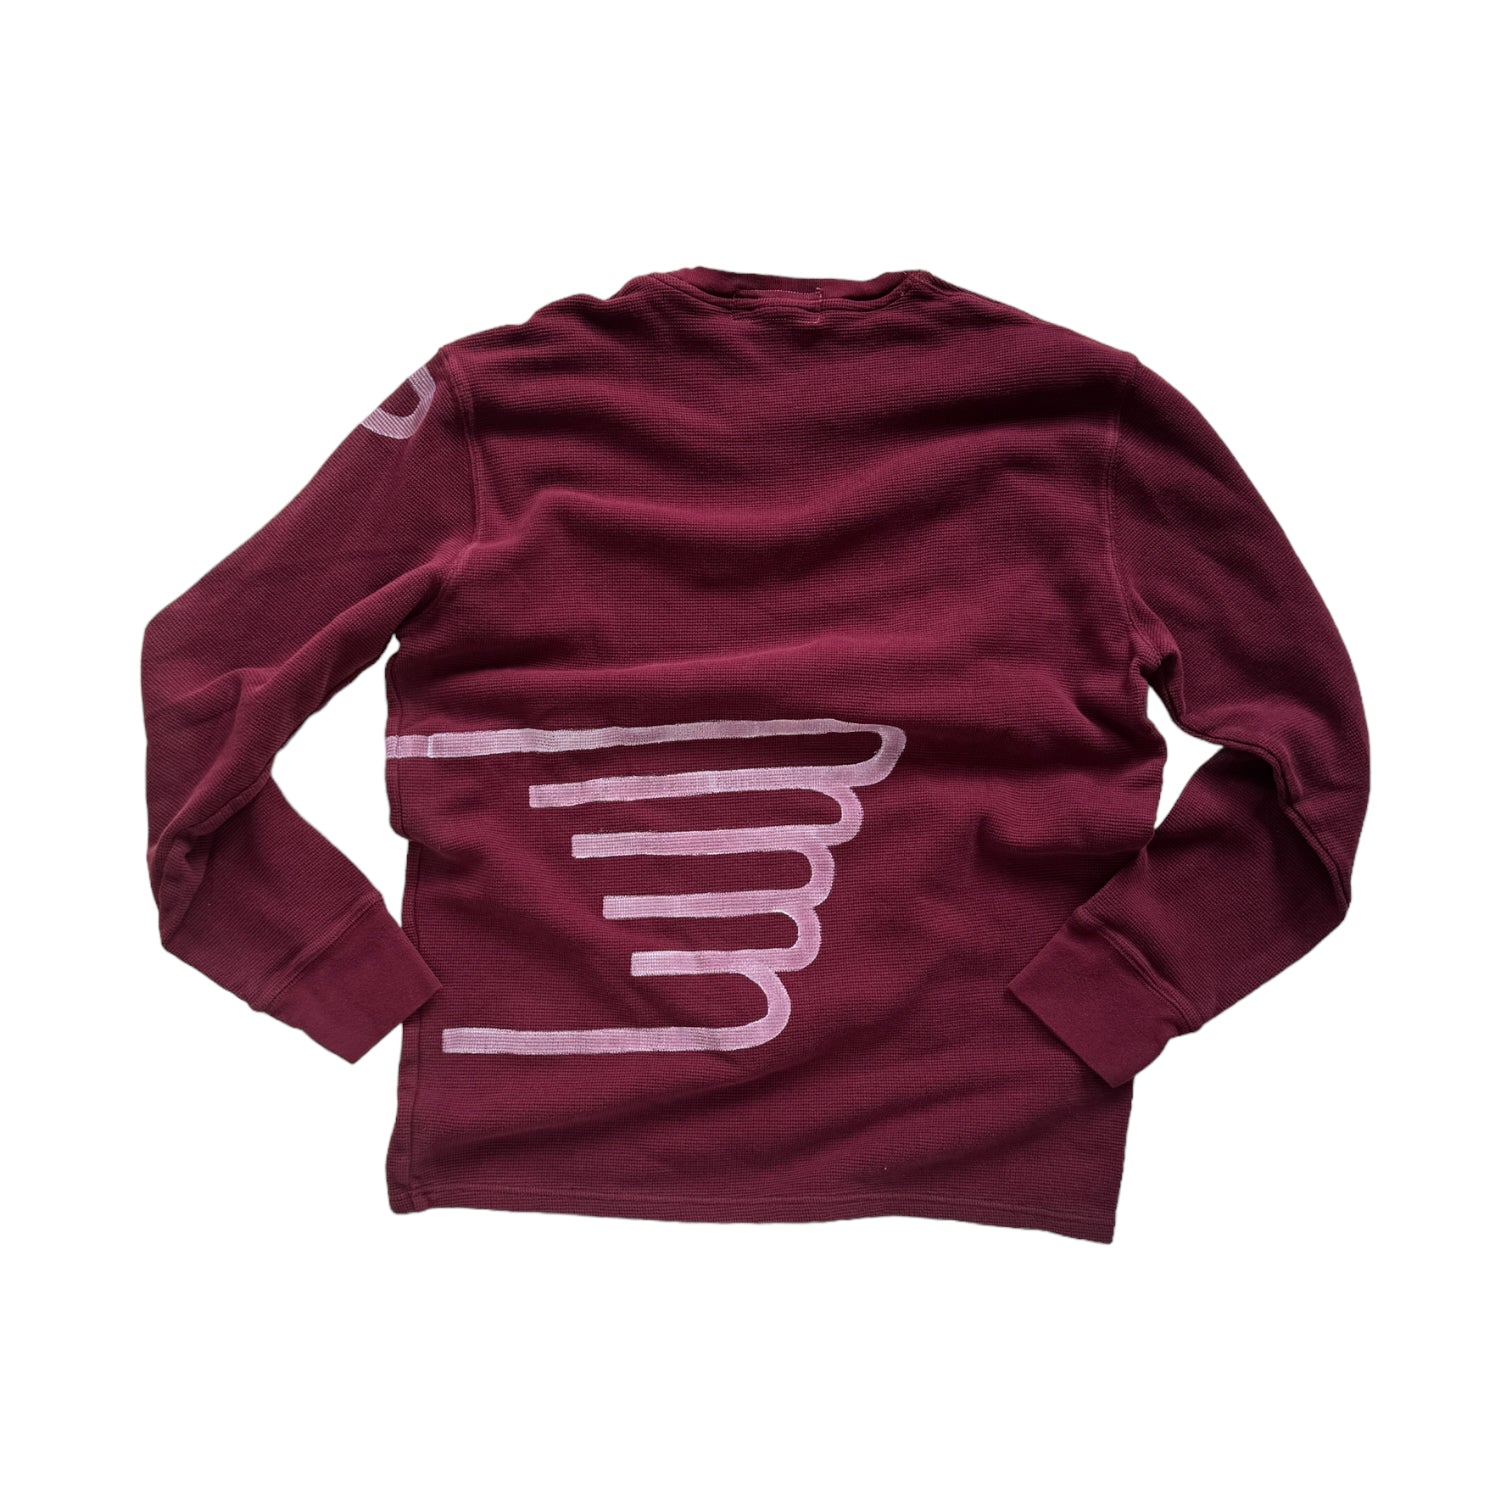 back of maroon red waffle shirt with white hand-painted angel wing across the lower back